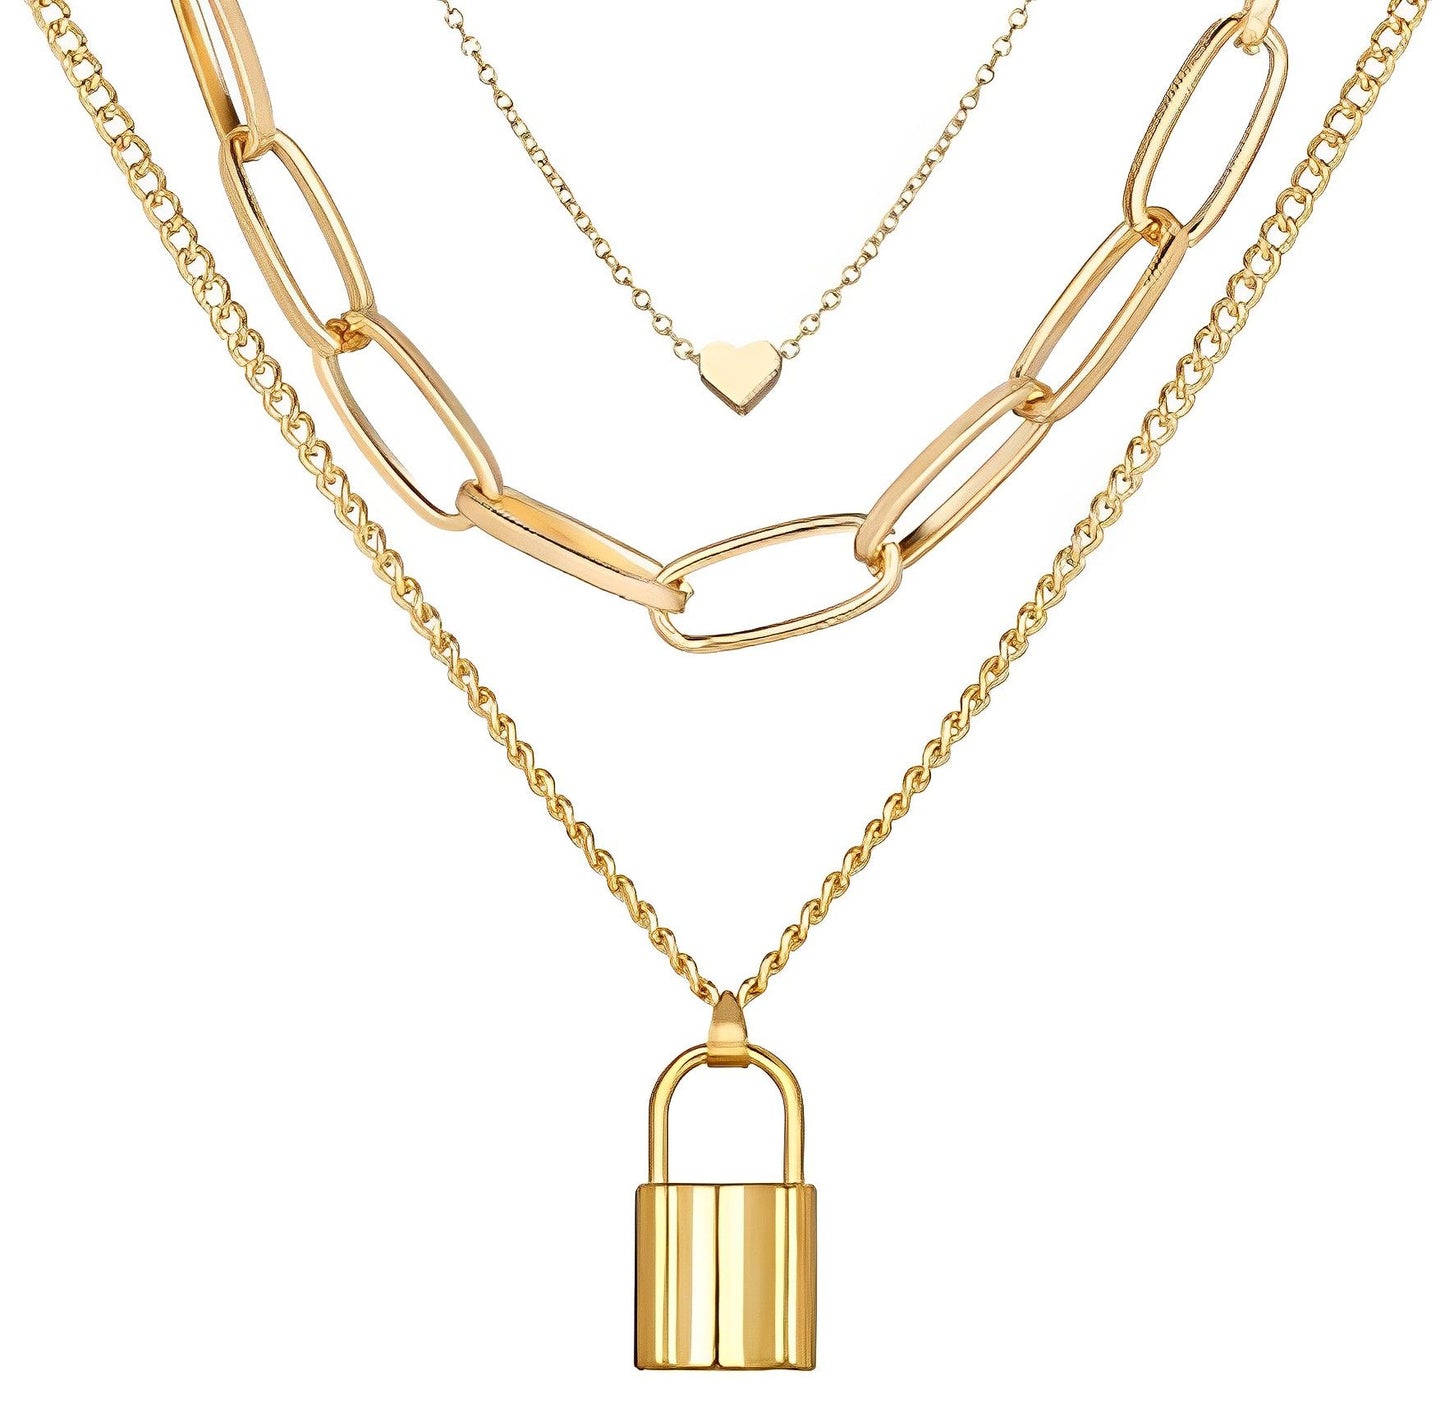 Golden Triple Layered Heart And Lock Pendant Necklace For Women & Girls